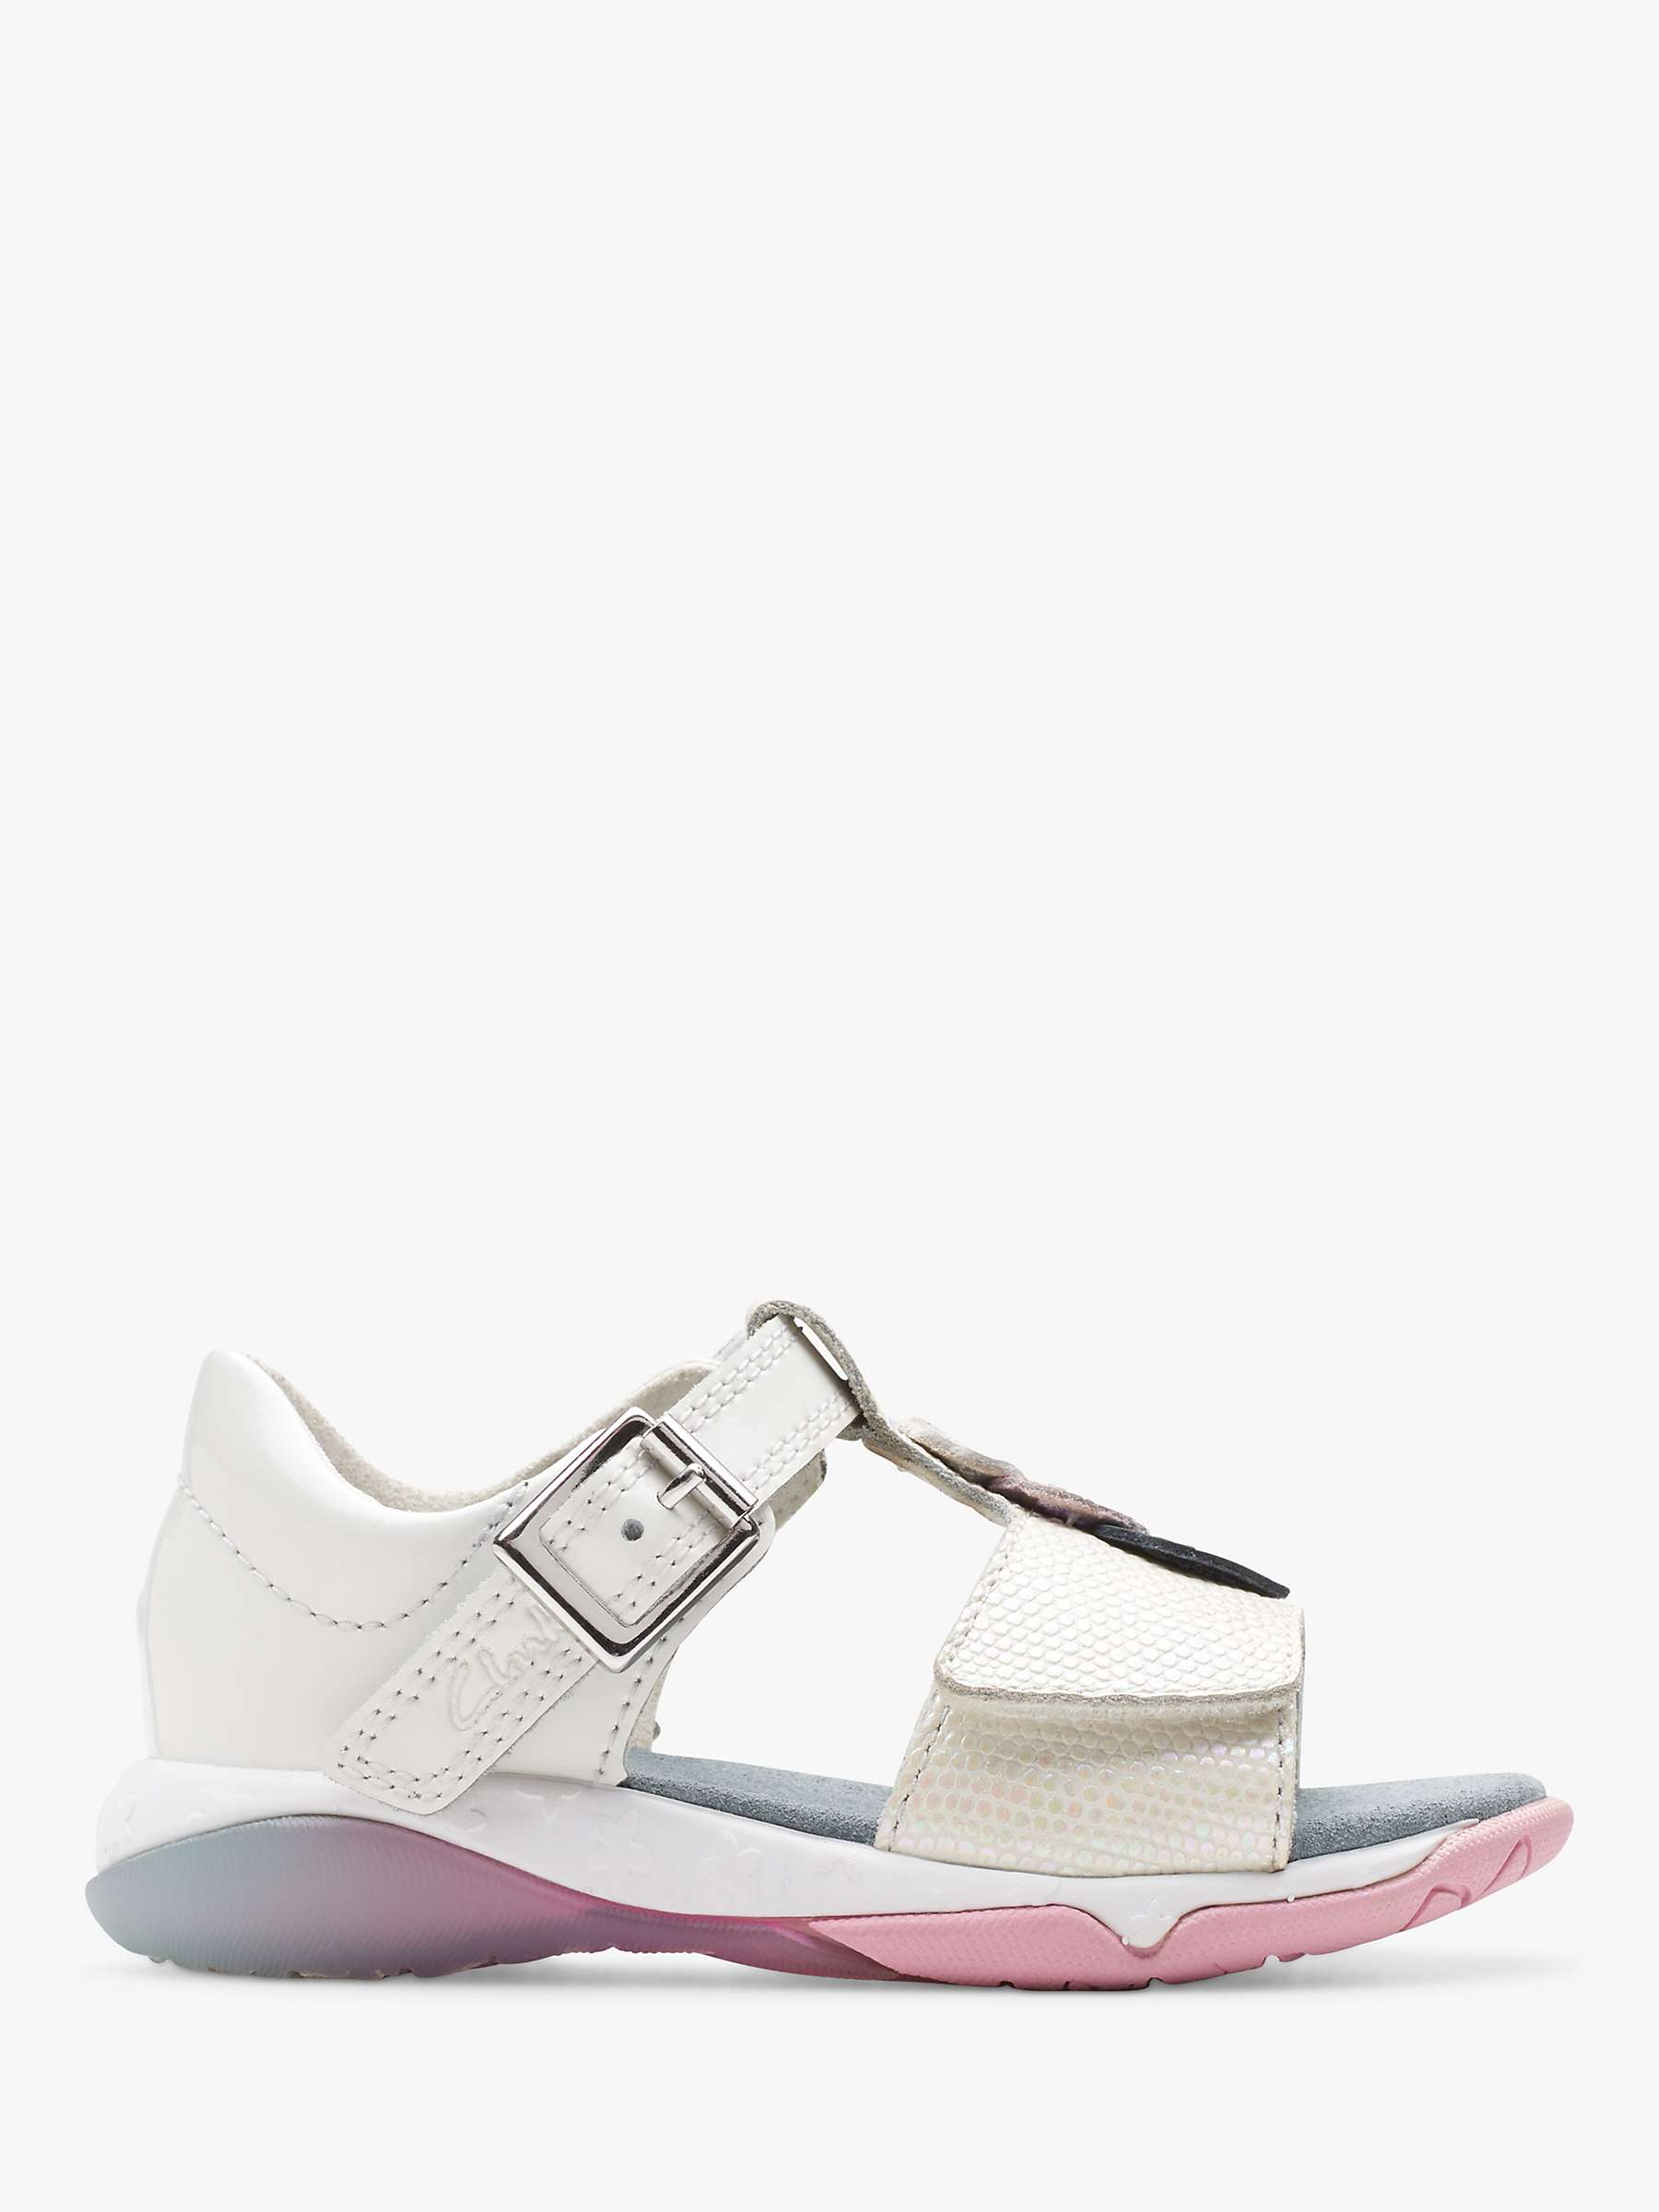 Buy Clarks Kids' Osian Charm Leather Sandals, White Online at johnlewis.com